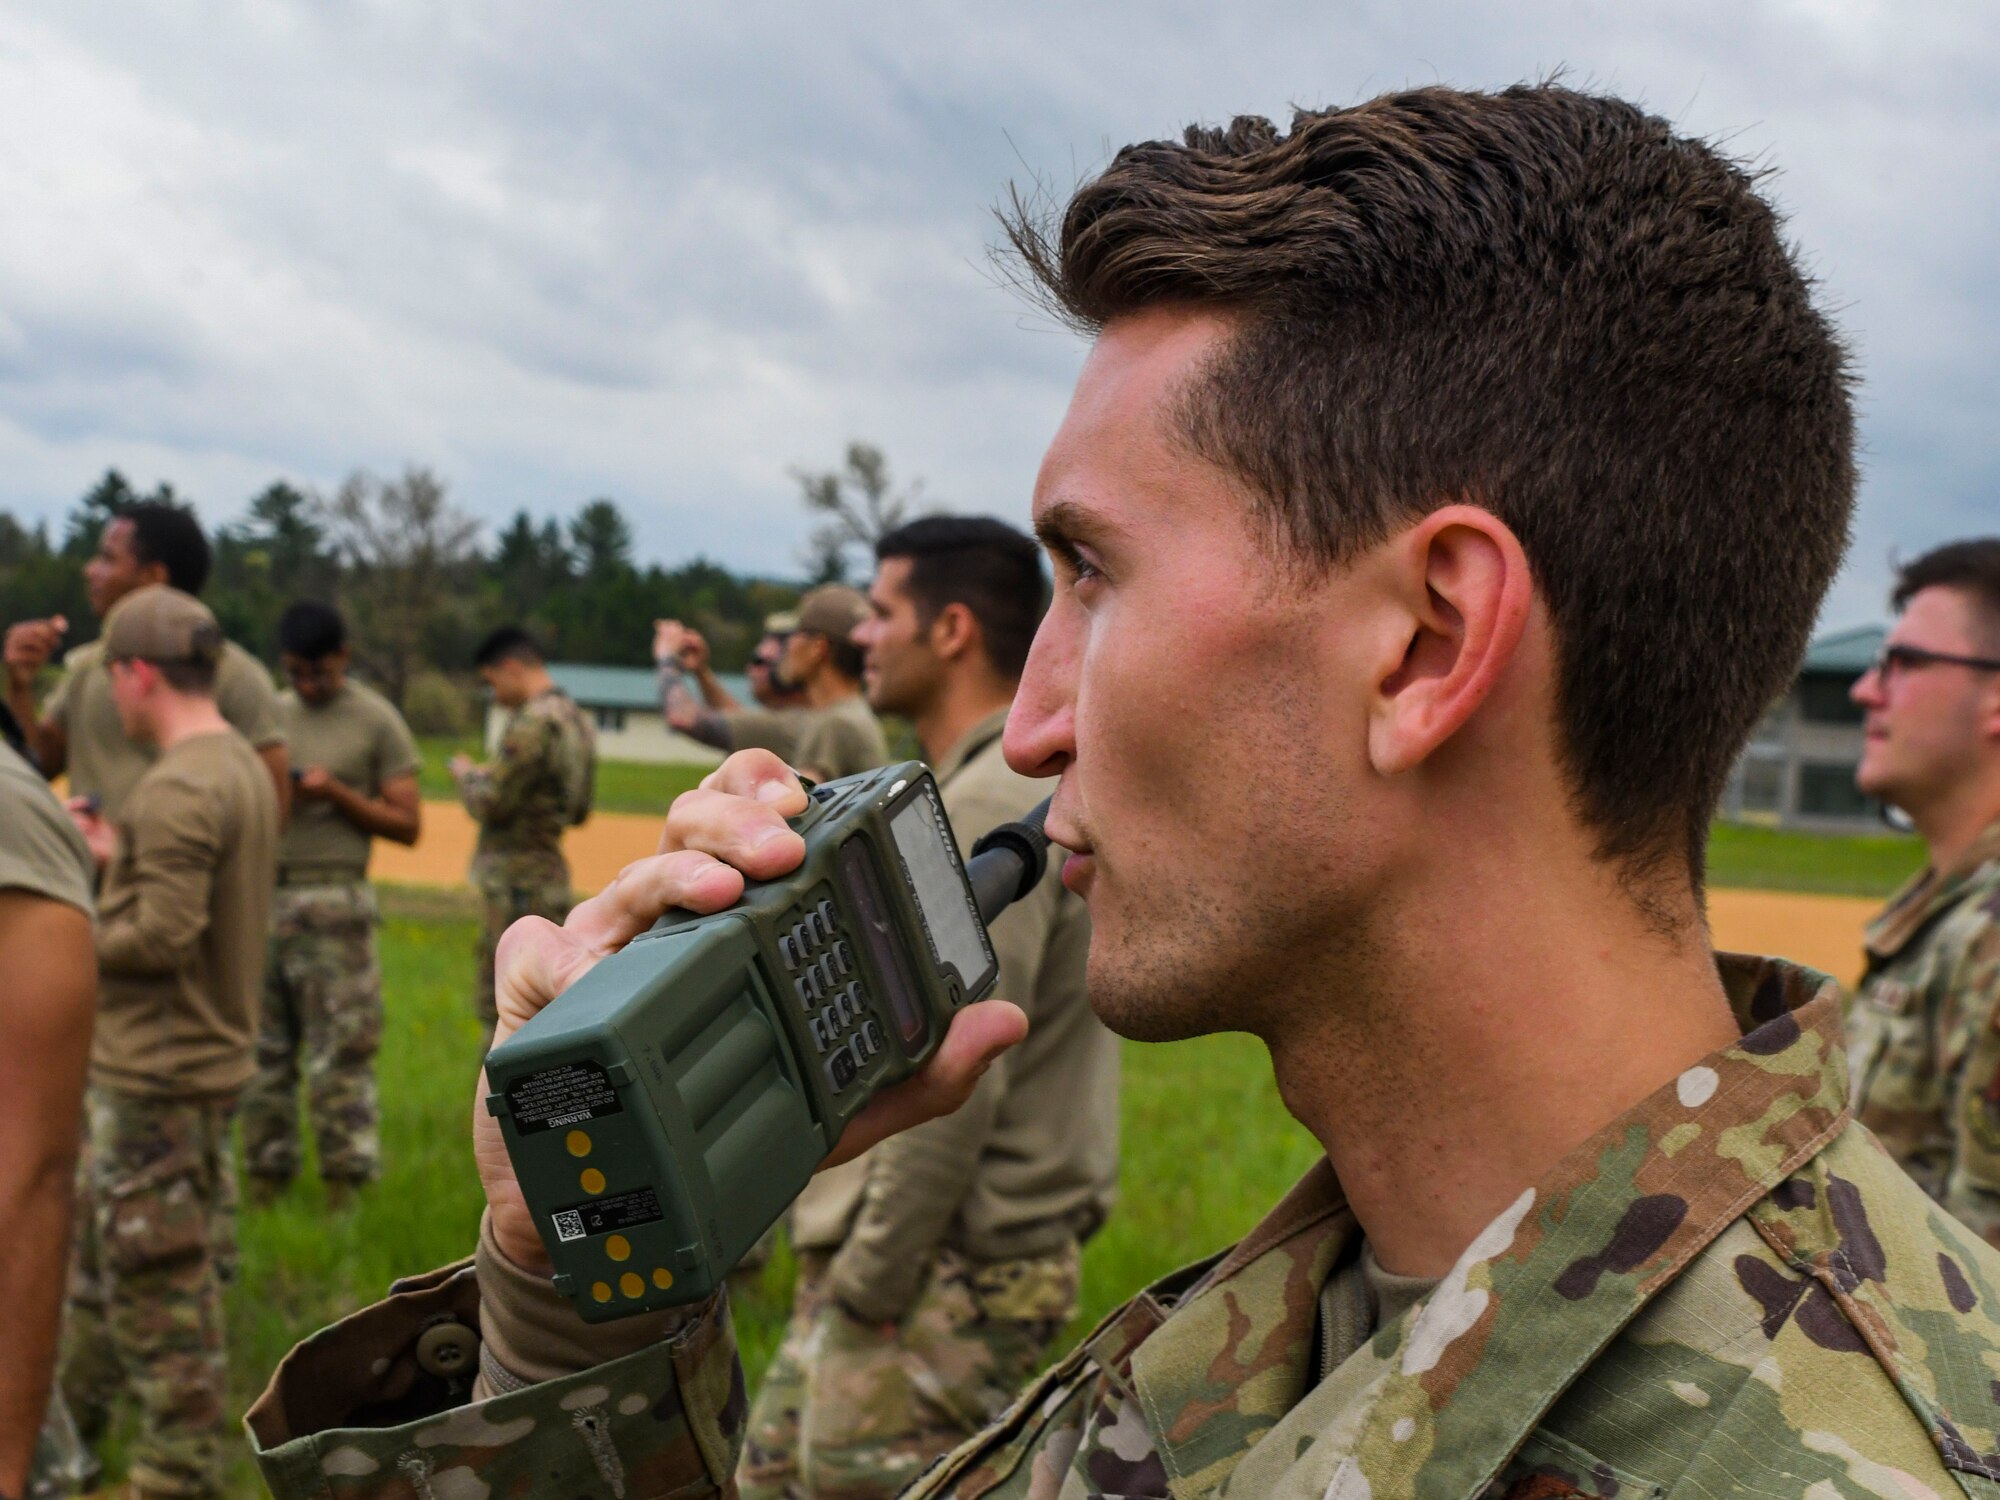 A photo of an airman talking on a radio